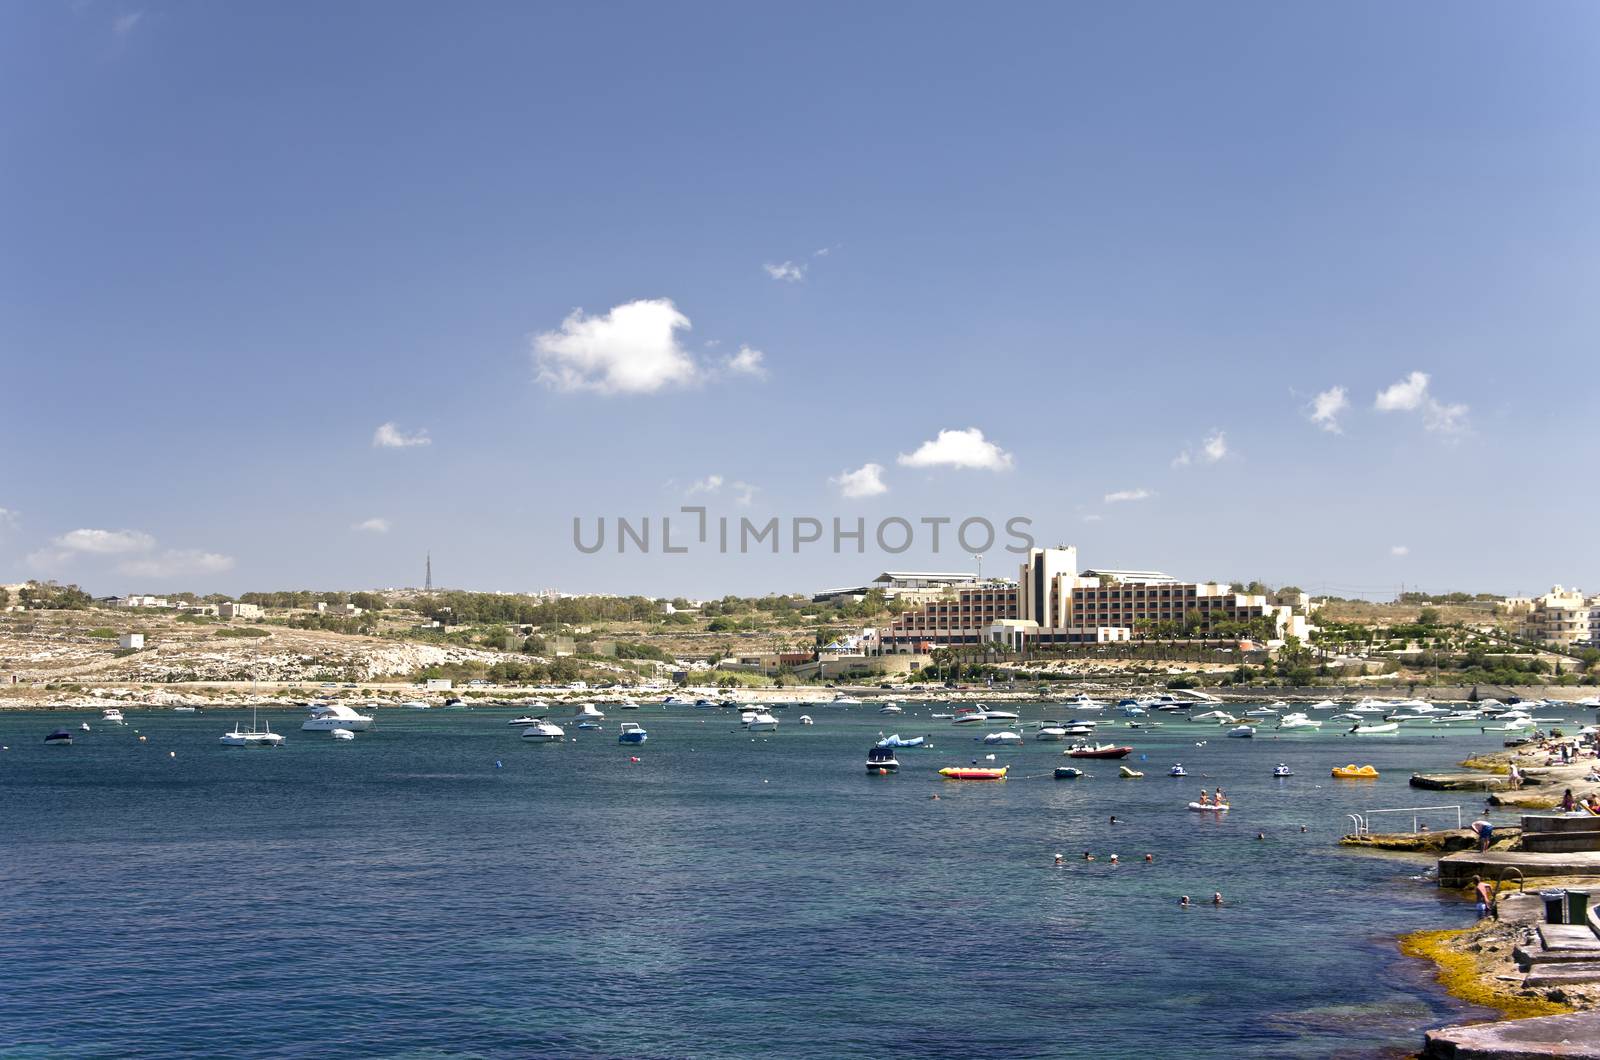 Salina Bay in the north-western part of Malta island with tourist facilities in the background - Bugibba, Malta